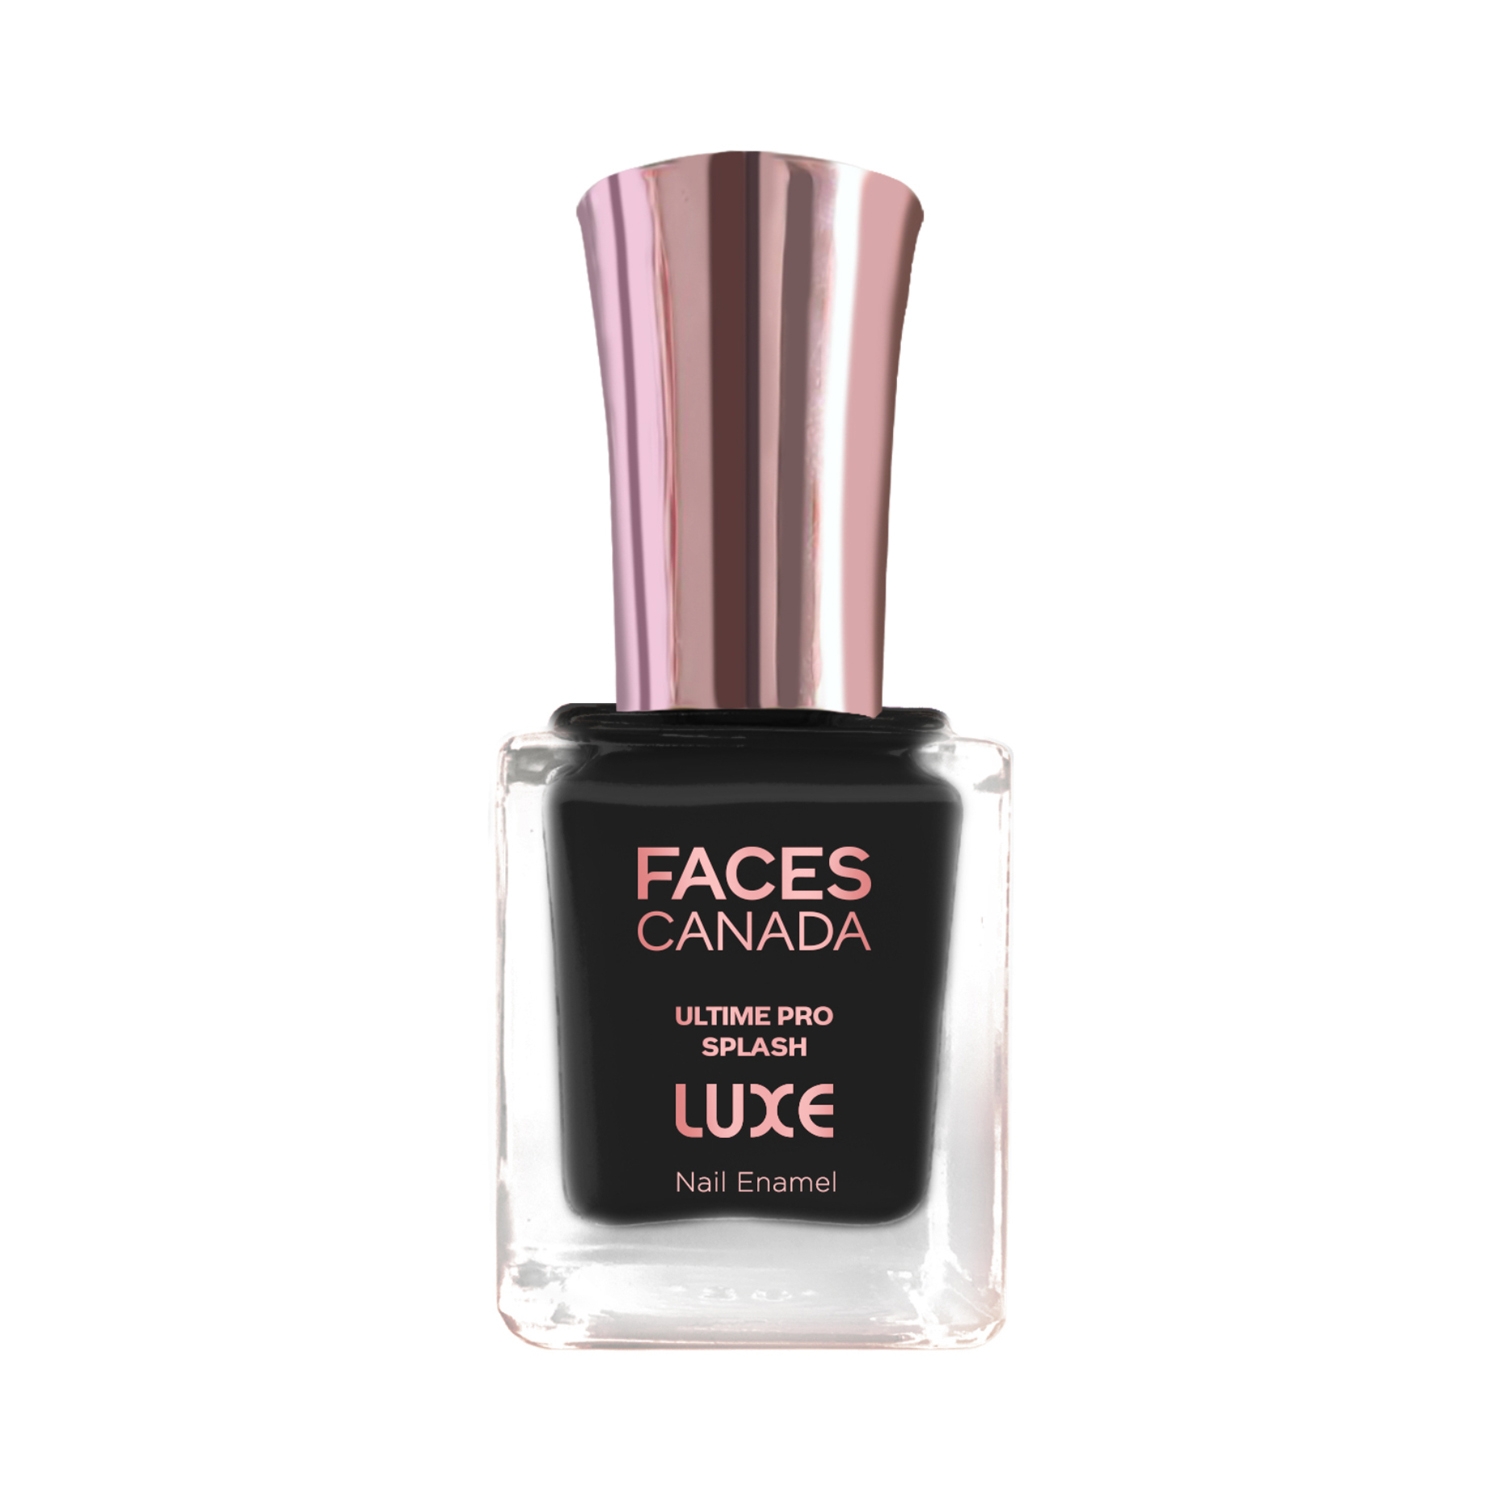 Faces Canada | Faces Canada Ultime Pro Splash Luxe Nail Enamel - L25 Charcoal (12ml)